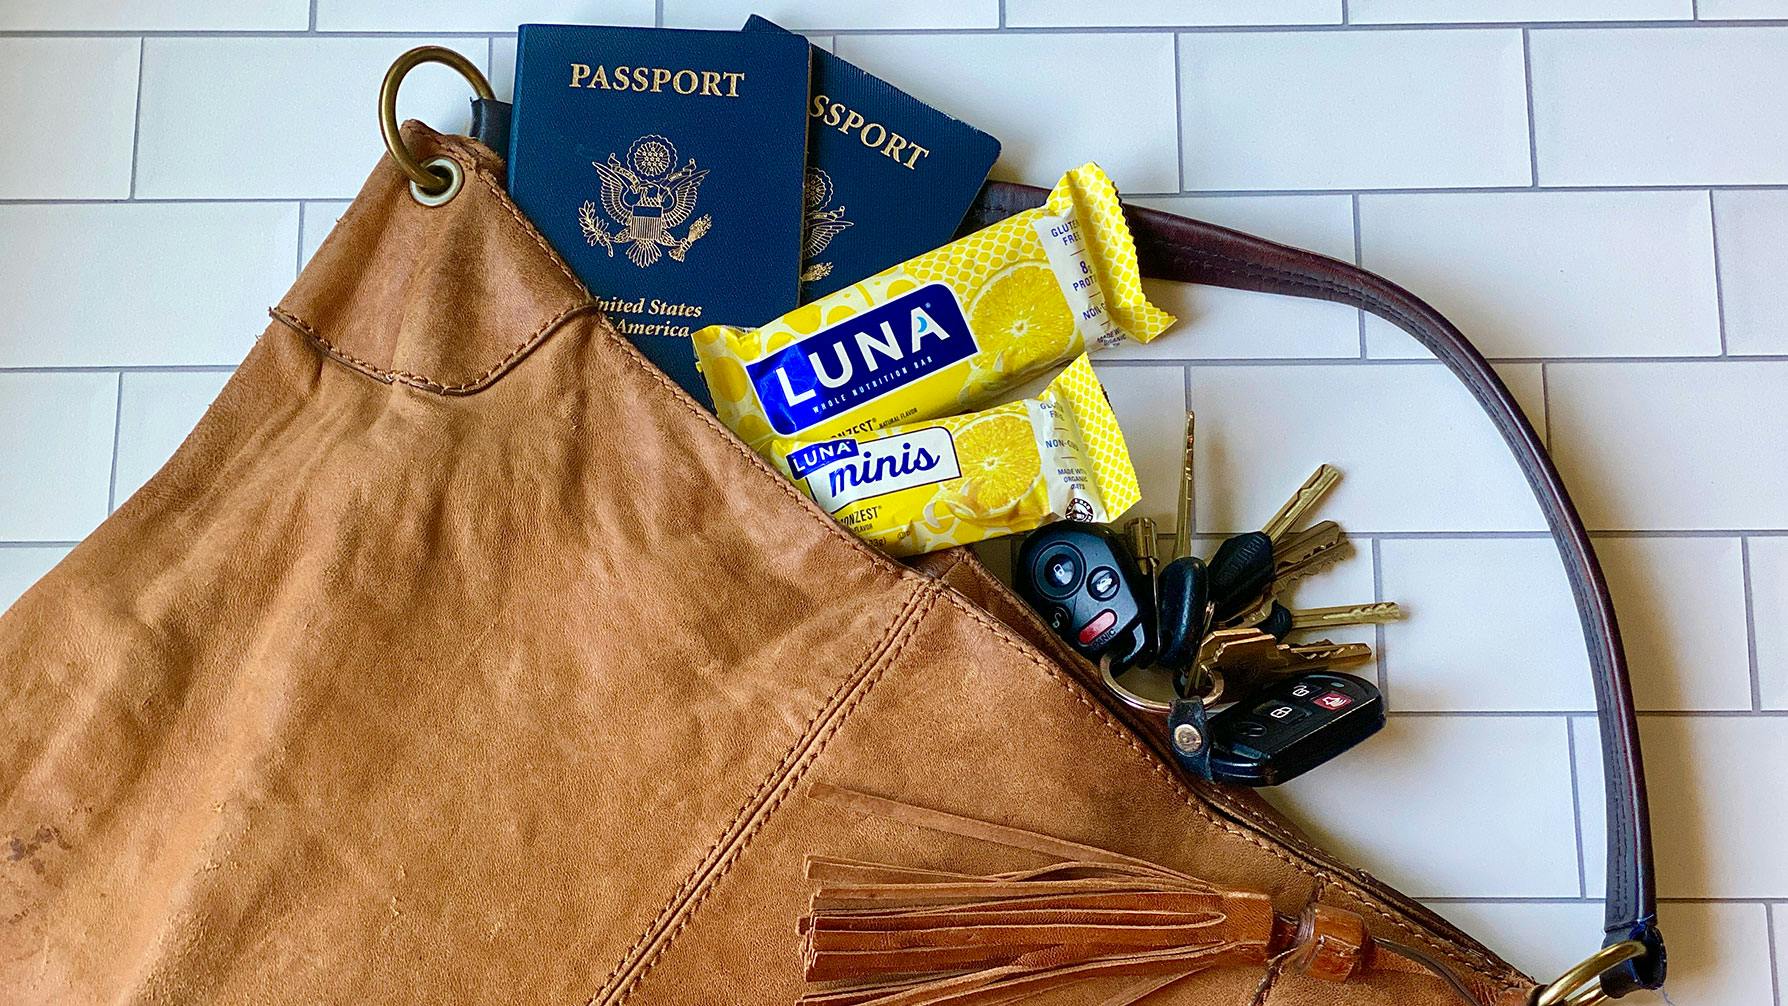 Purse packed with passports and LUNA Bars